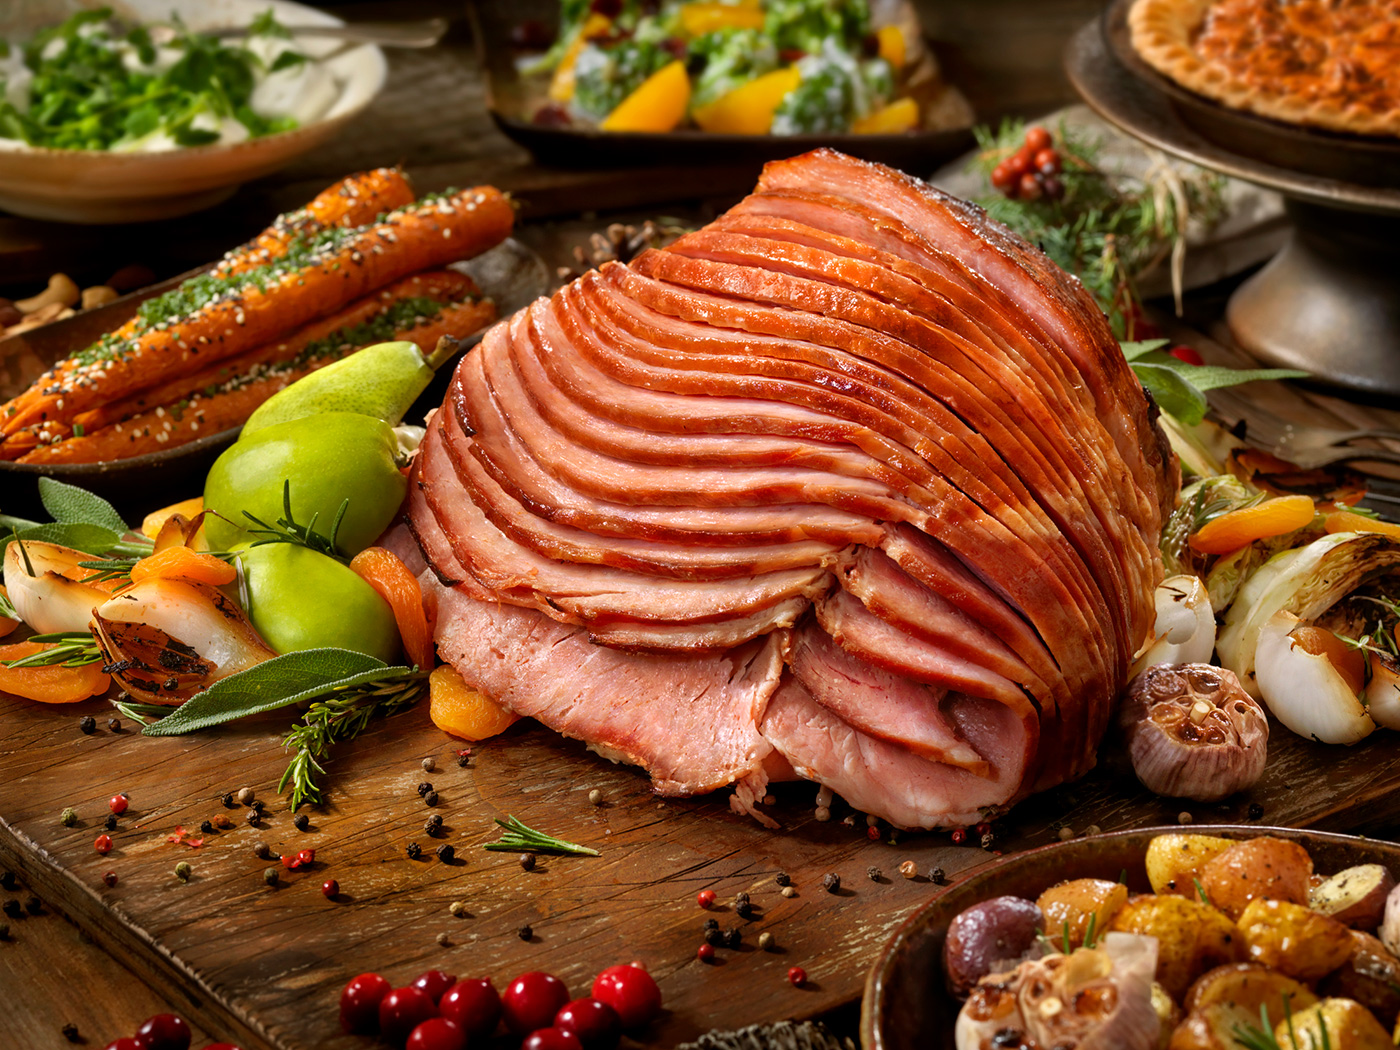 Ham With Beer and Brown Sugar Glaze Recipe